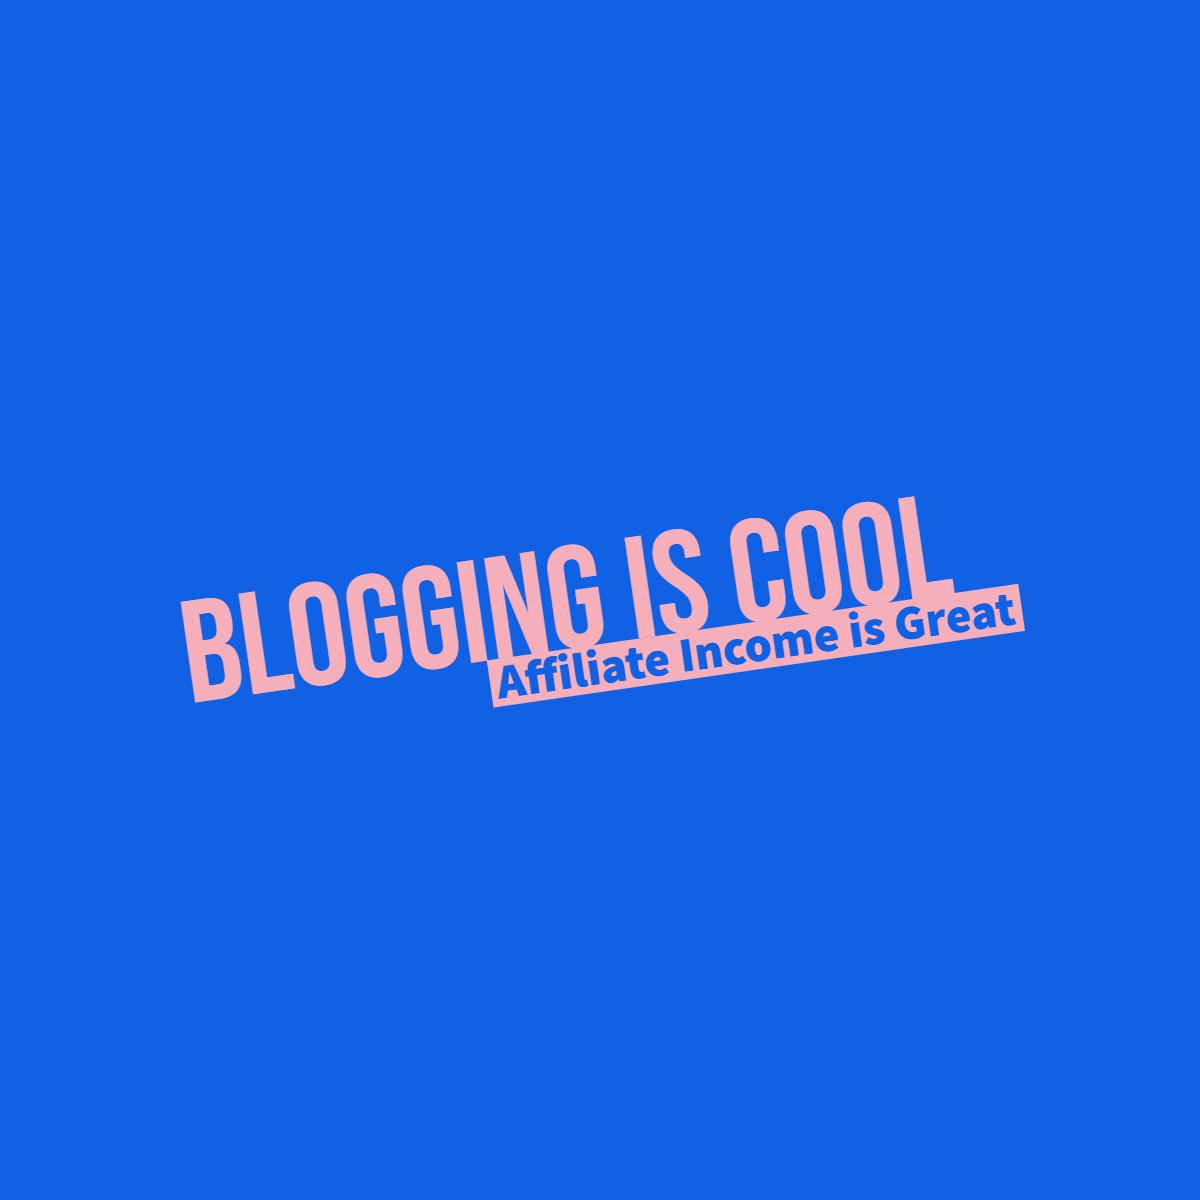 Bloggingiscool.com The Importance of an Engaging "About" Page on Your Blog